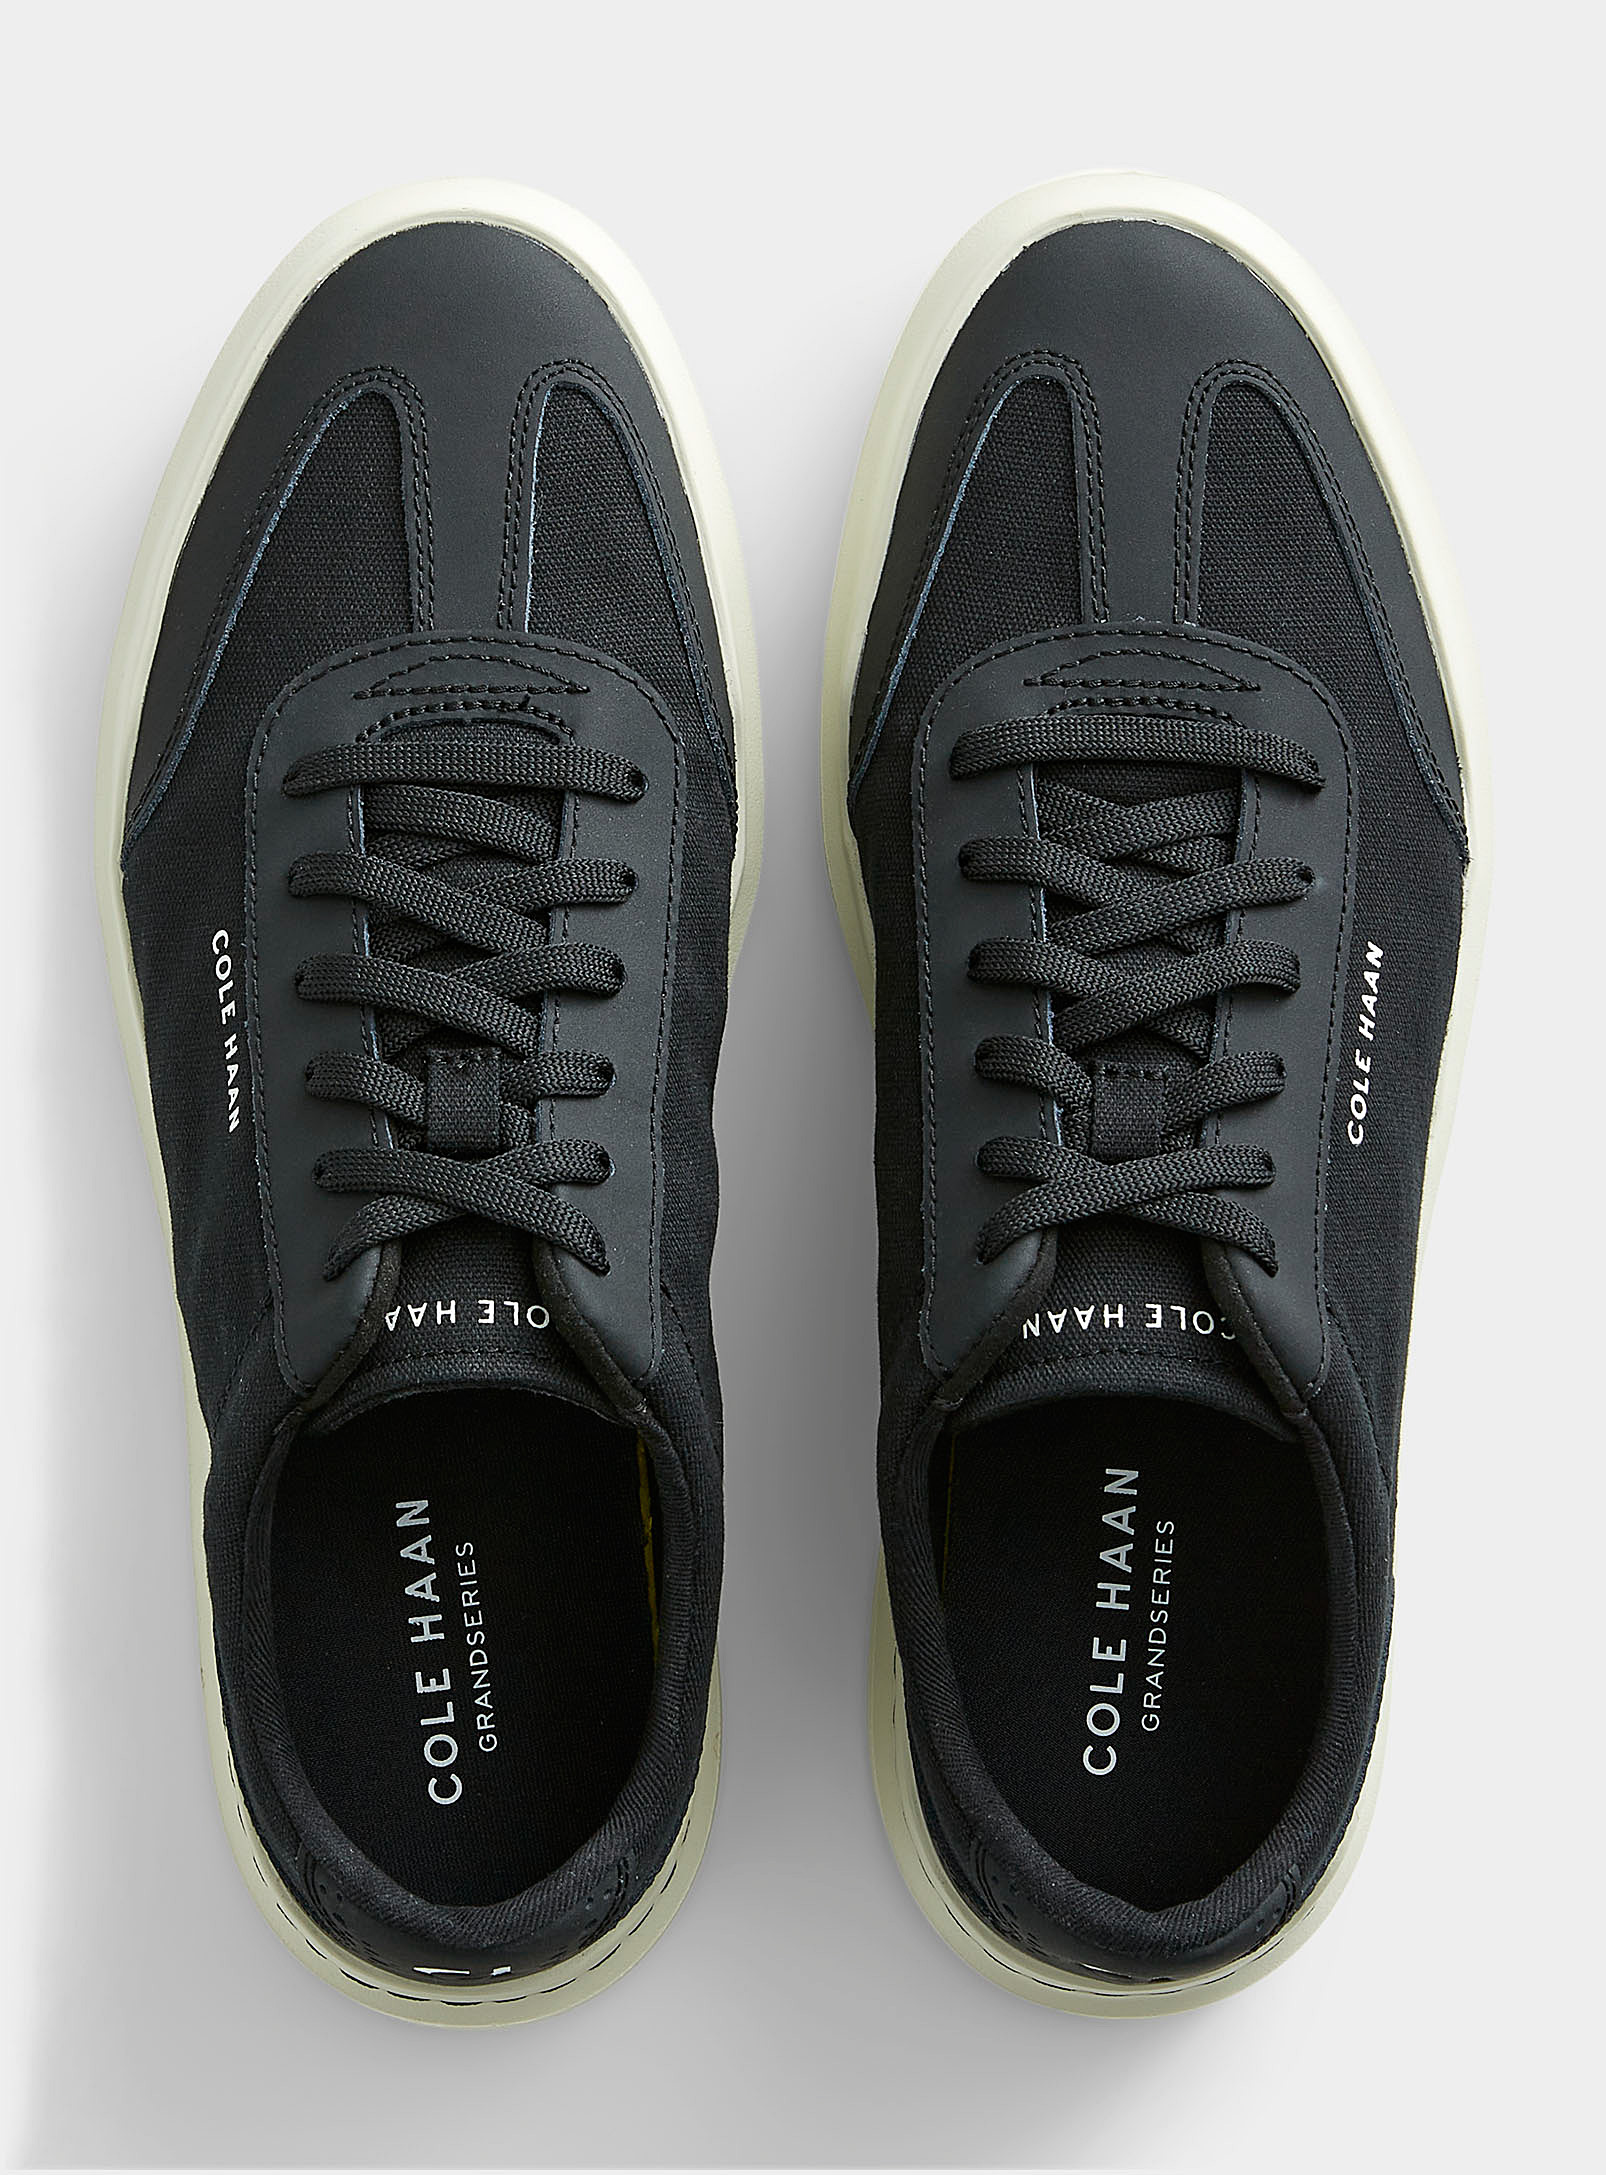 Cole Haan - Chaussures Le Sneaker GrandPr Rally T-toe Homme